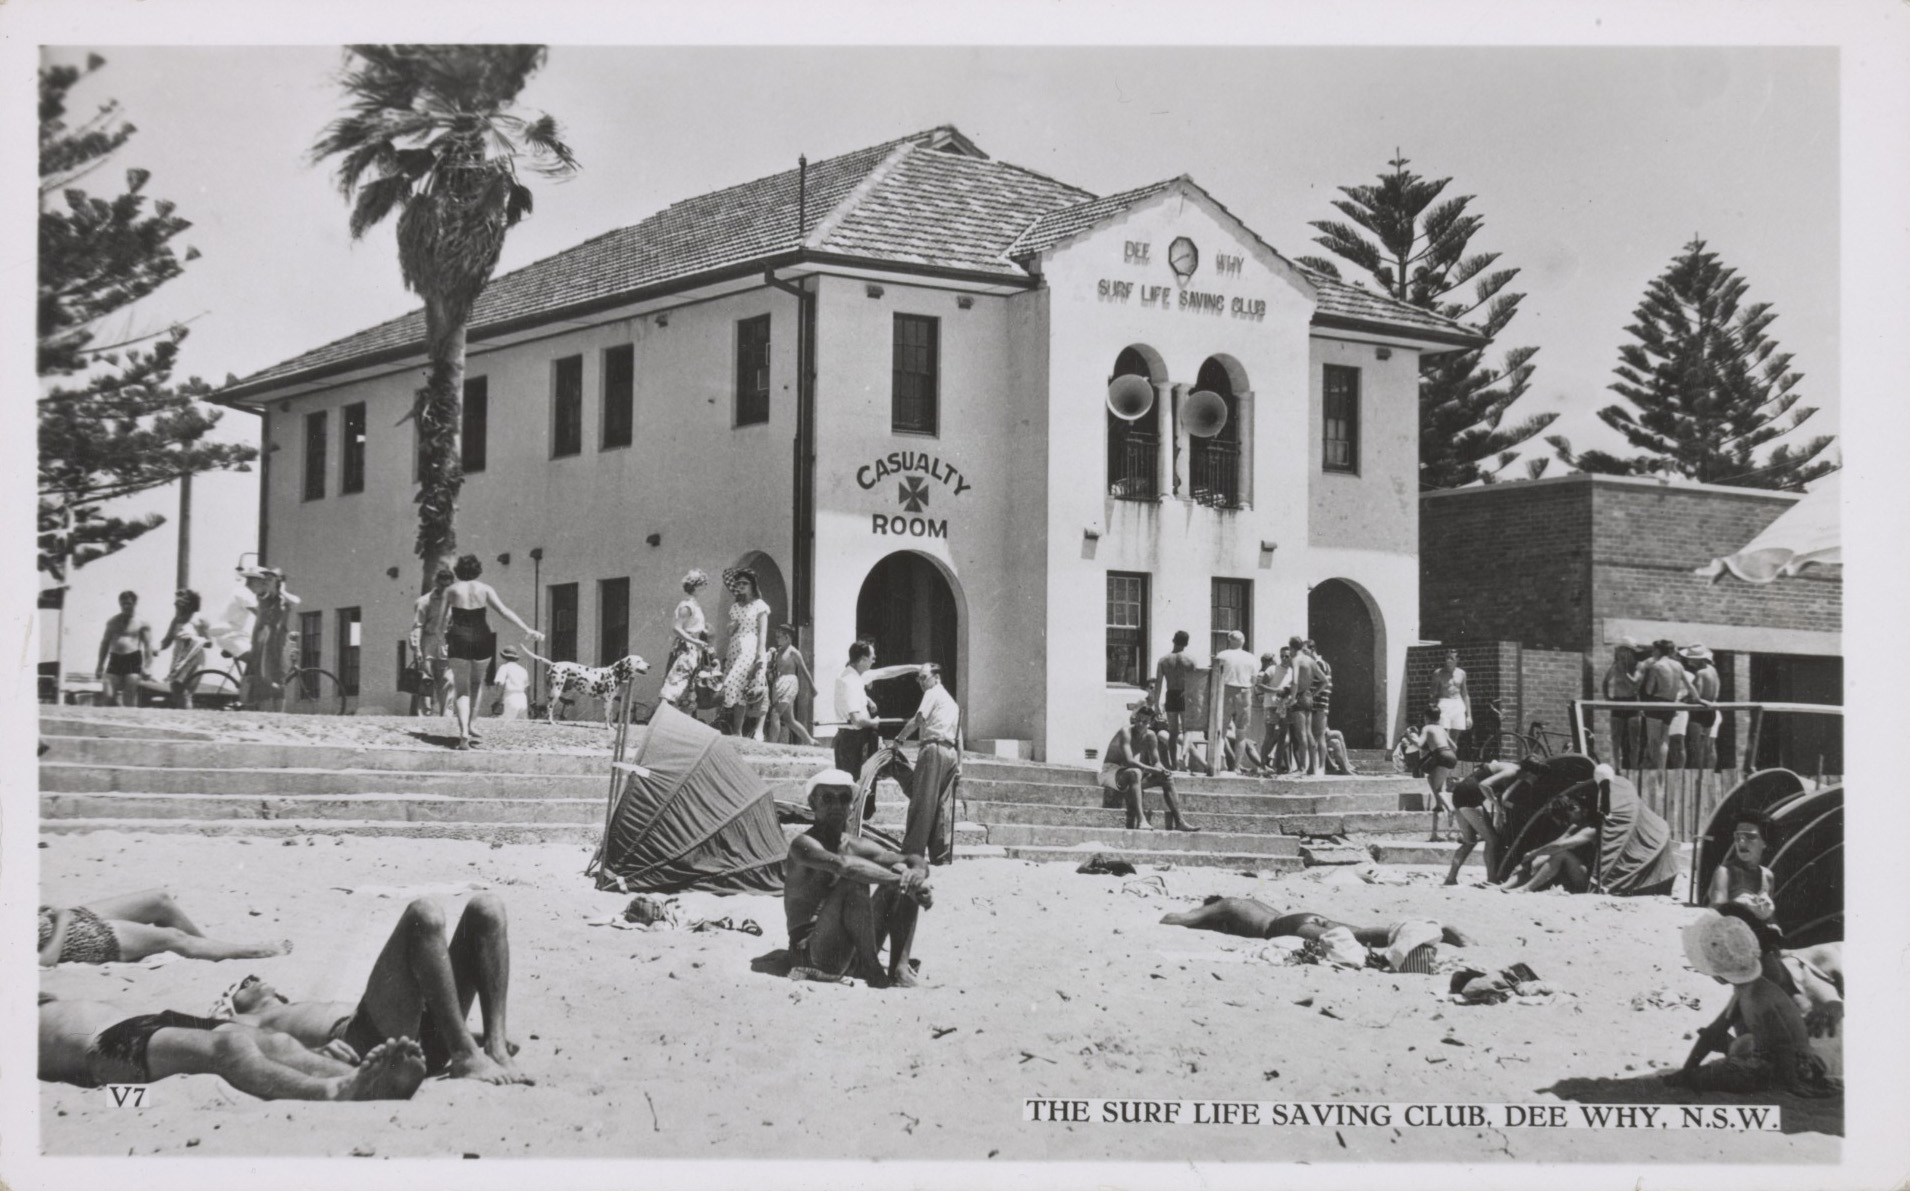 The Surf Life Saving Club, Dee Why, New South Wales.